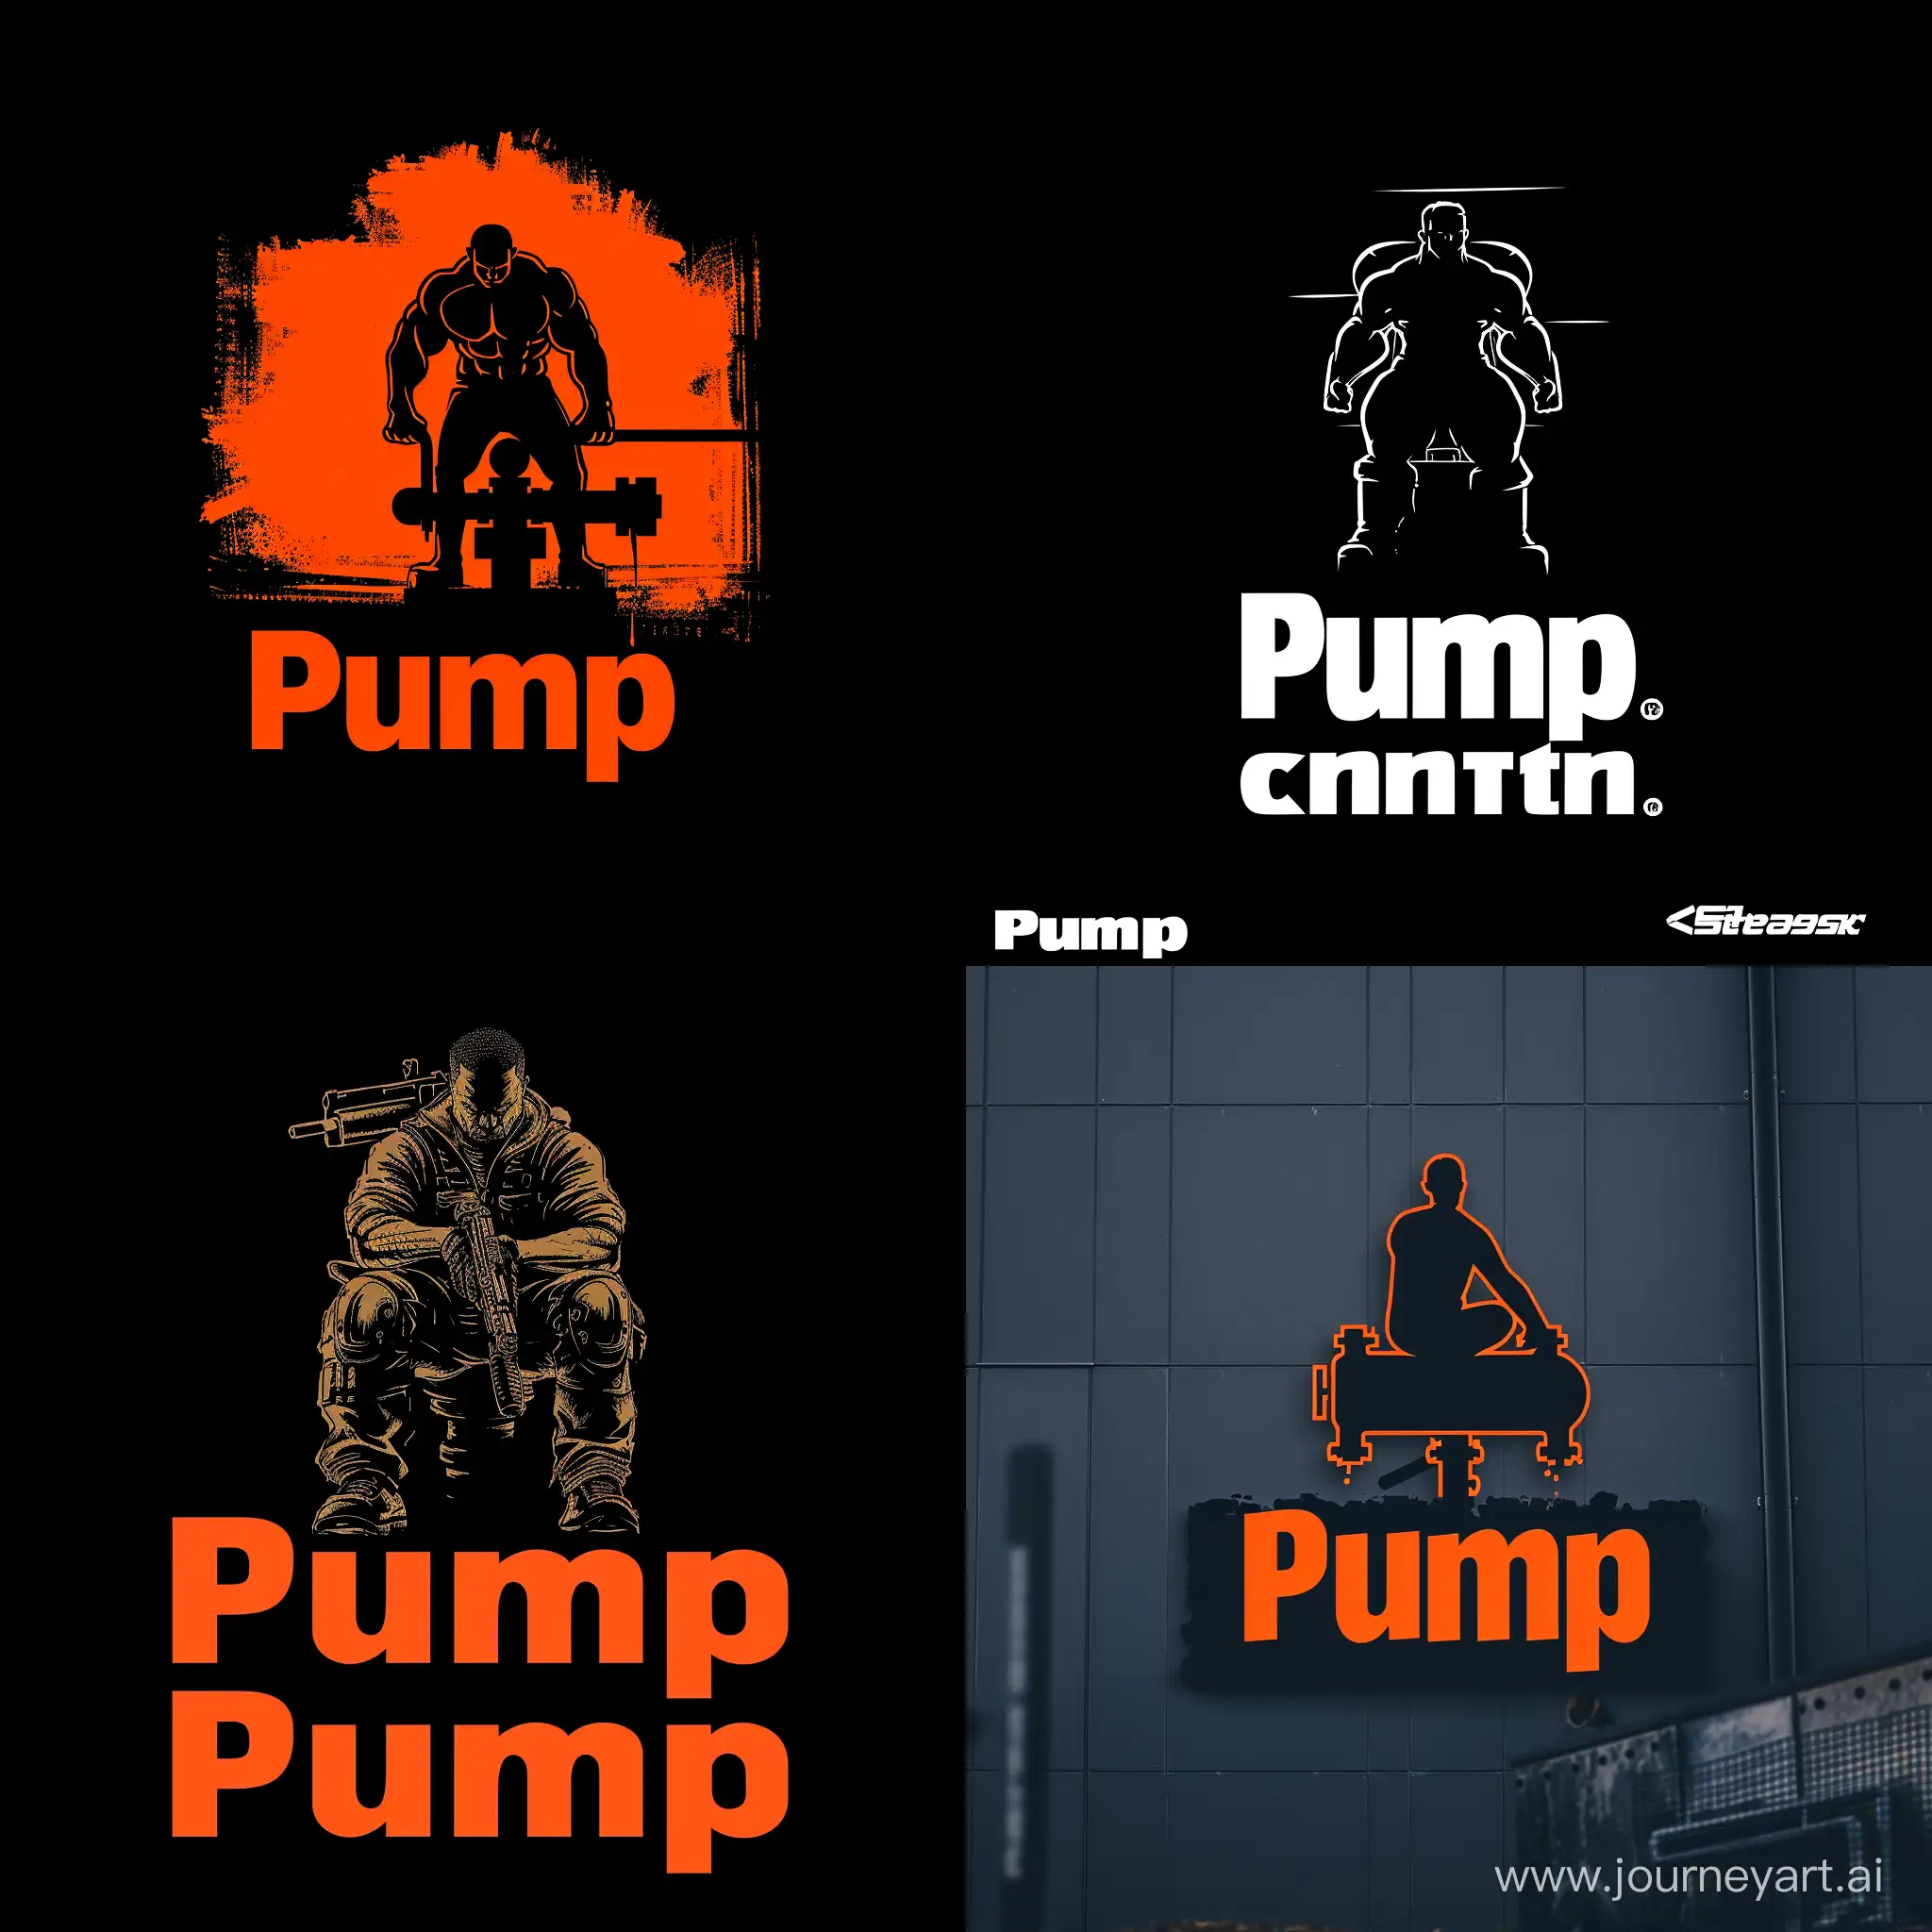 Centralized-Pump-Logo-Design-with-Man-Creative-and-EyeCatching